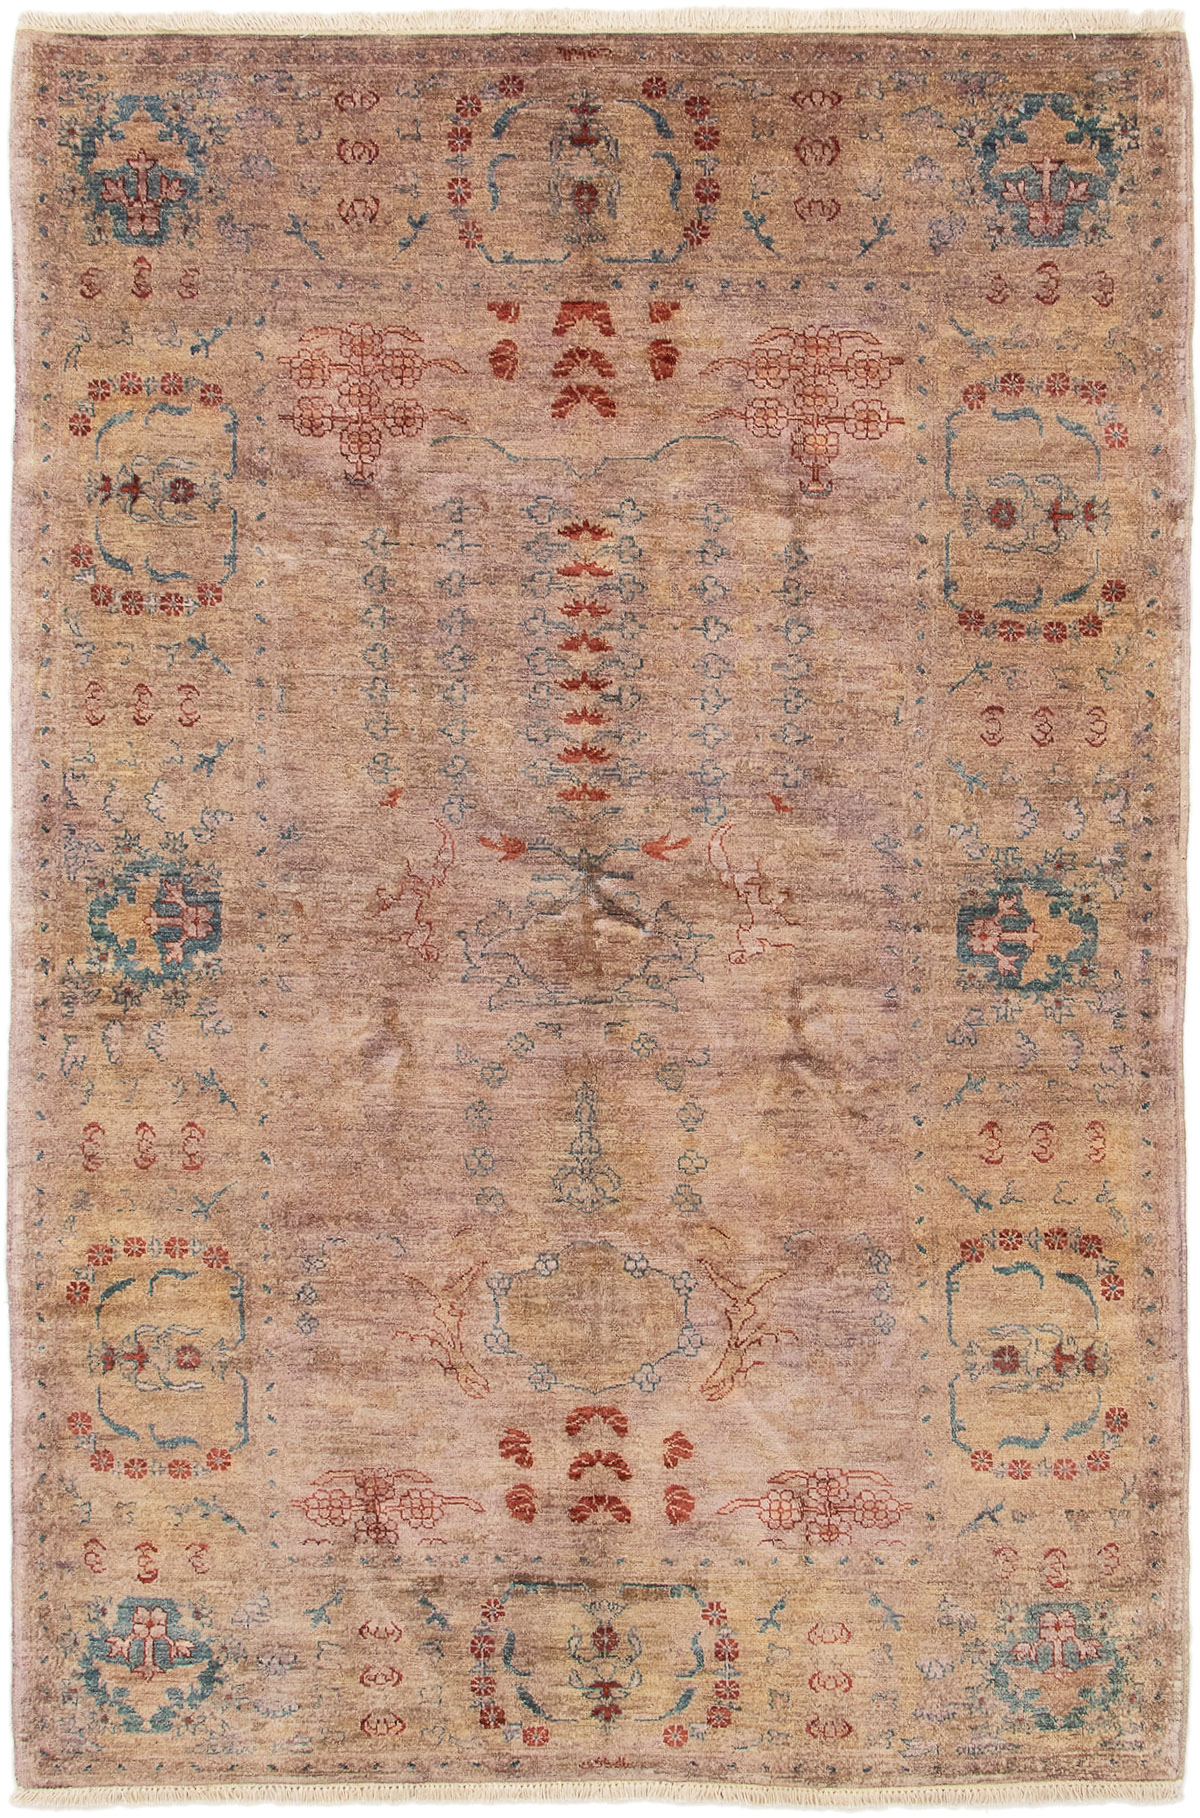 Hand-knotted Color transition Tan Wool Rug 5'4" x 7'10" Size: 5'4" x 7'10"  